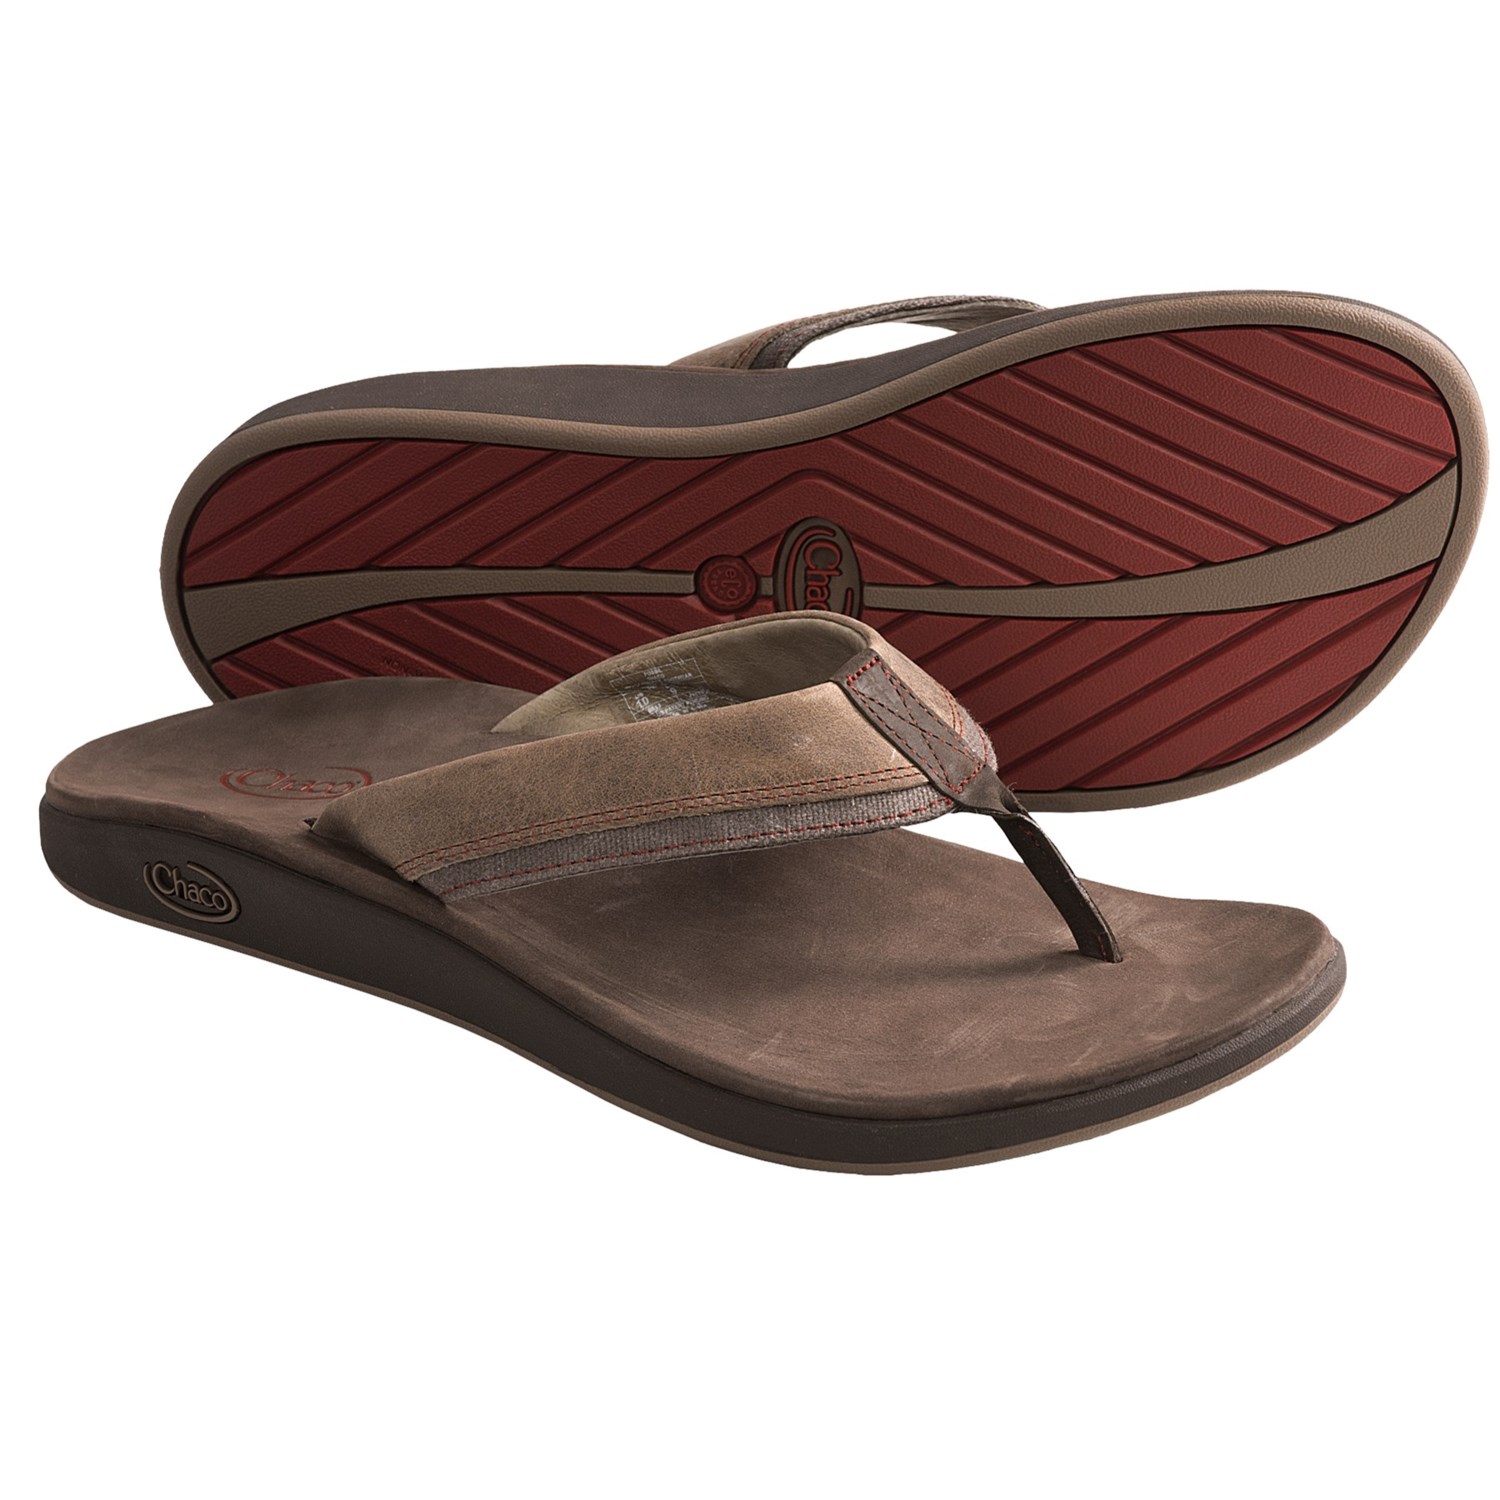 Chaco Fontas Sandals - Leather, Flip-Flops (For Men) - Save 29%